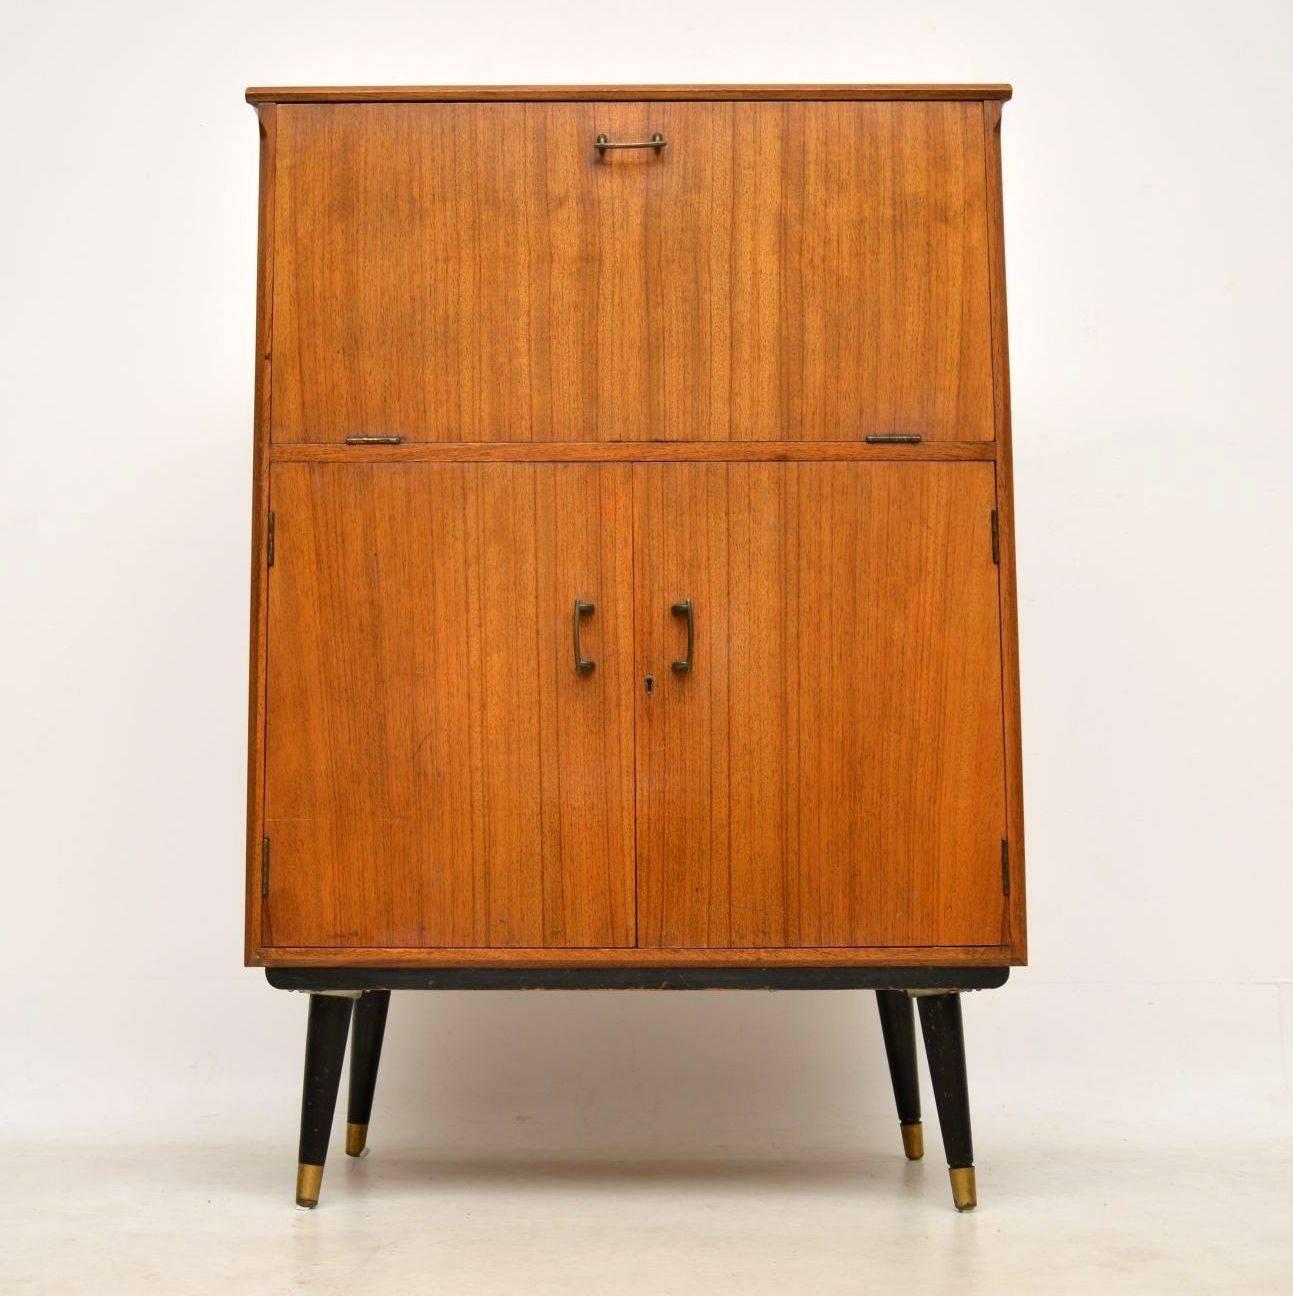 A stylish and practical vintage drinks cabinet in walnut, this dates from the 1950s-1960s. It’s in excellent condition for its age and is really well made, there is just some very minor surface wear here and there. The top opens out to reveal a